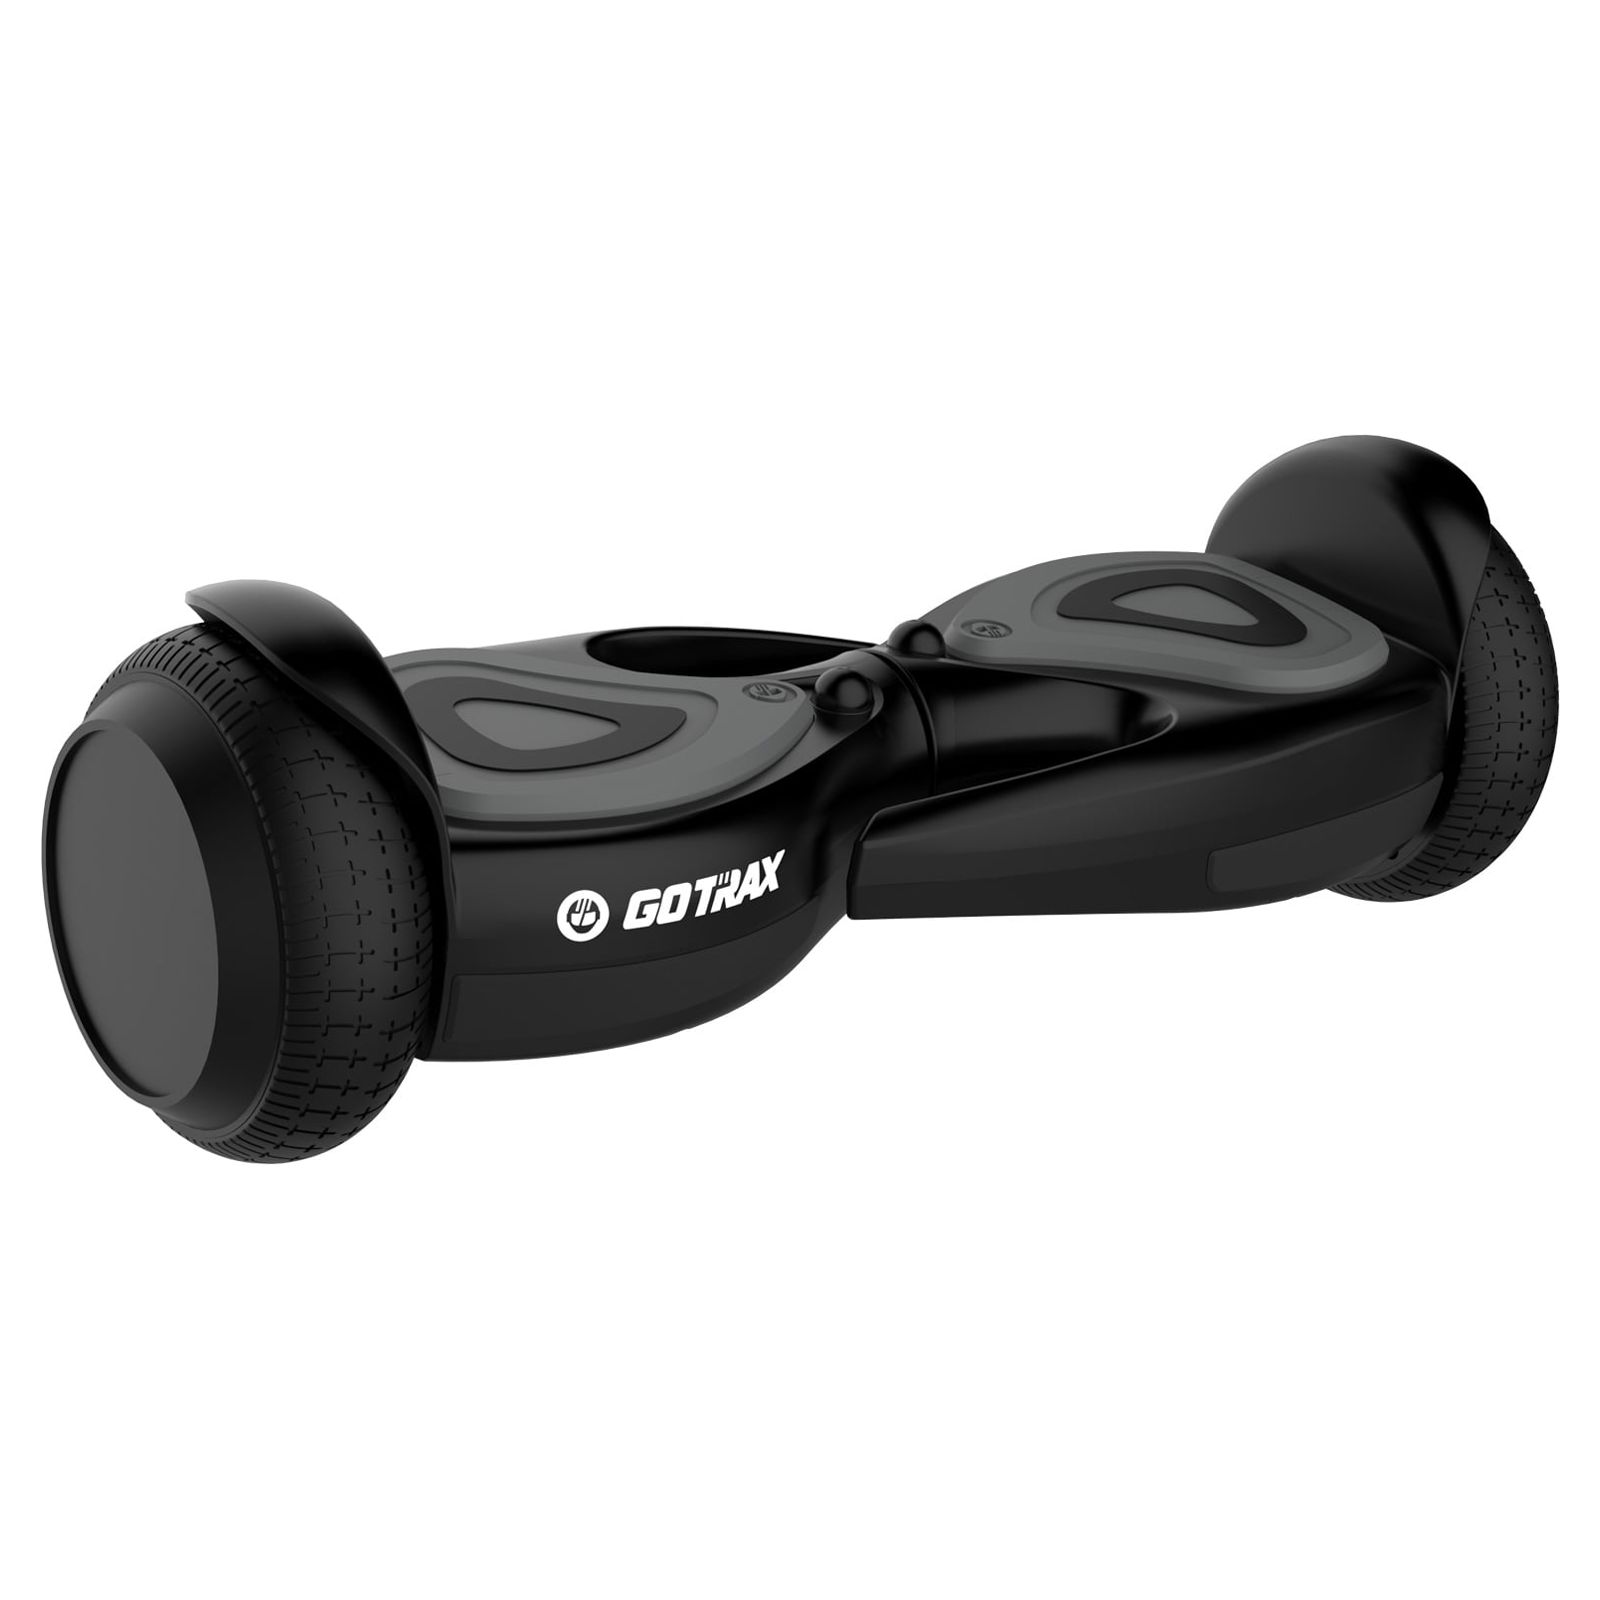 GOTRAX SRX Mini Hoverboard for Kids 6-12, 6.5" Wheels 150W Motor up to 5 mph Hover Boards Black - image 1 of 12